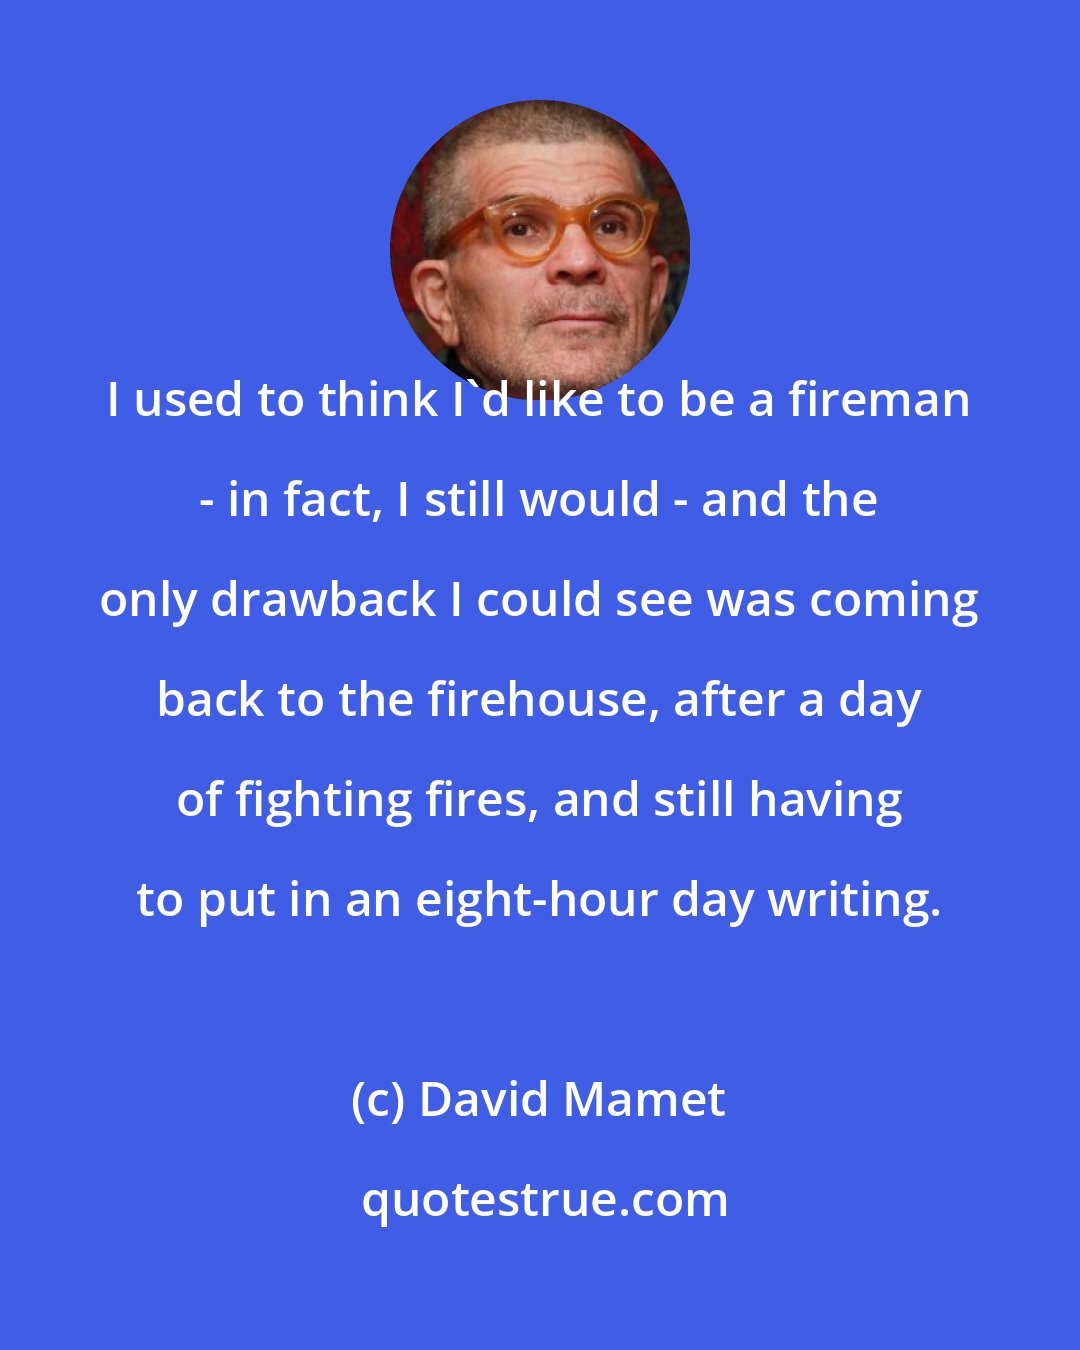 David Mamet: I used to think I'd like to be a fireman - in fact, I still would - and the only drawback I could see was coming back to the firehouse, after a day of fighting fires, and still having to put in an eight-hour day writing.